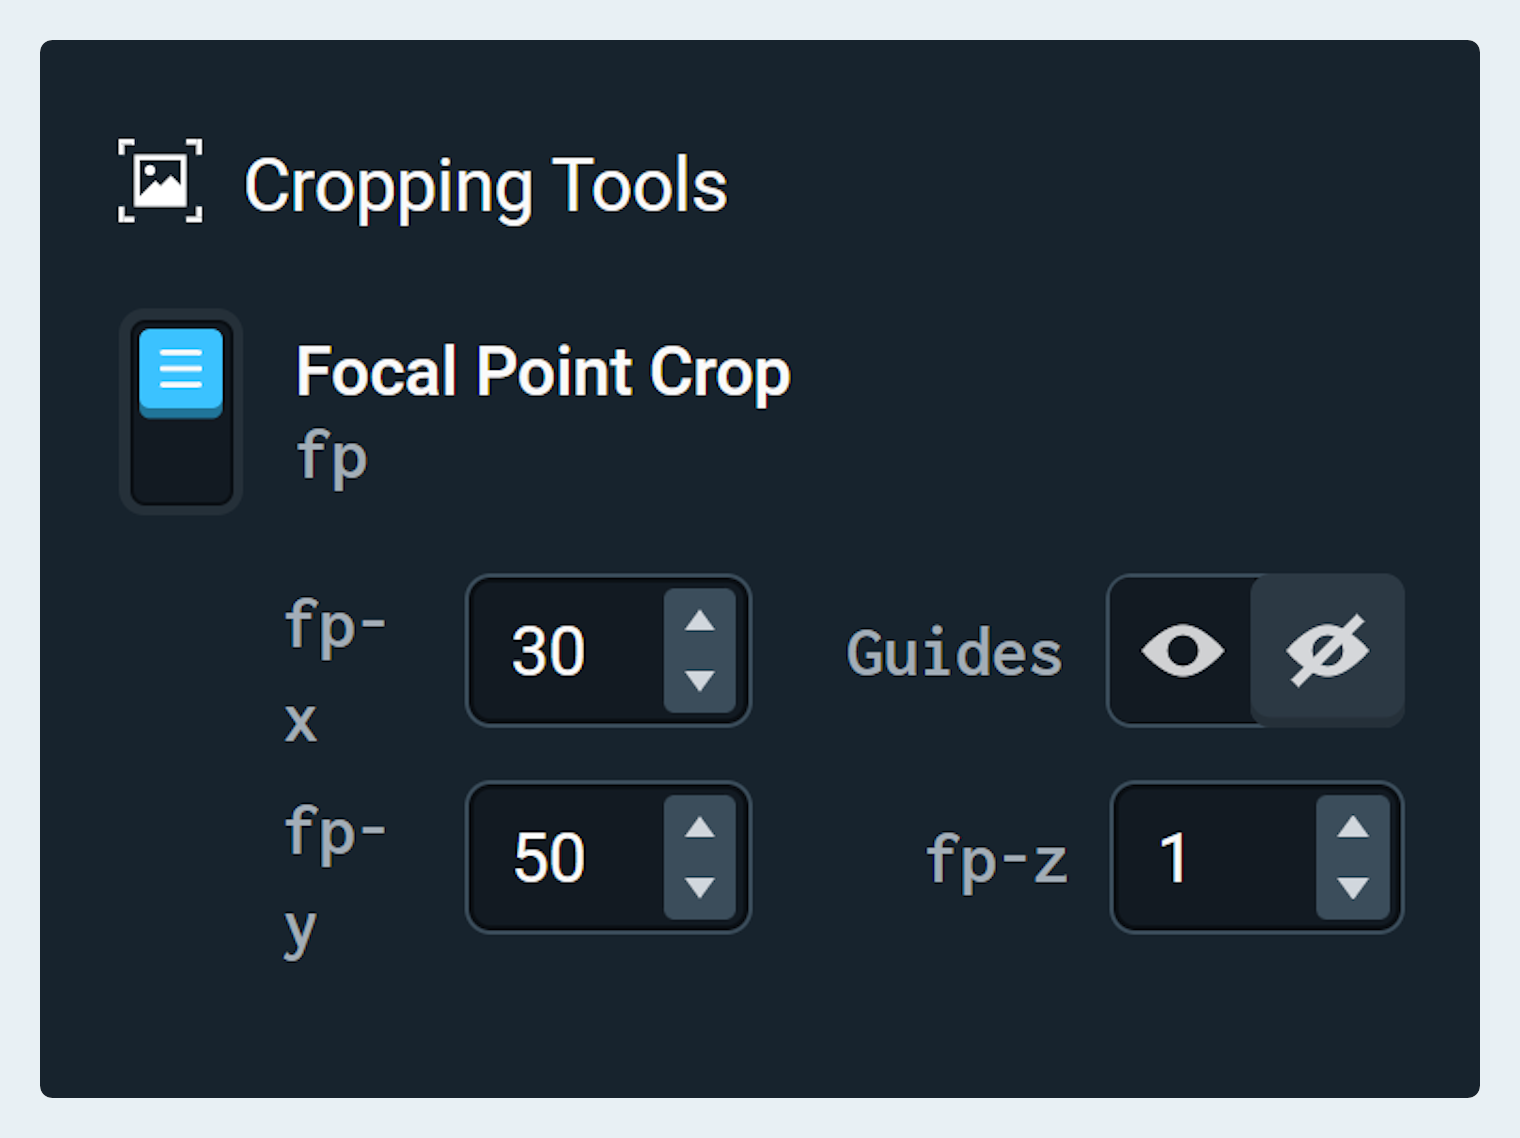 Cropping Tools panel